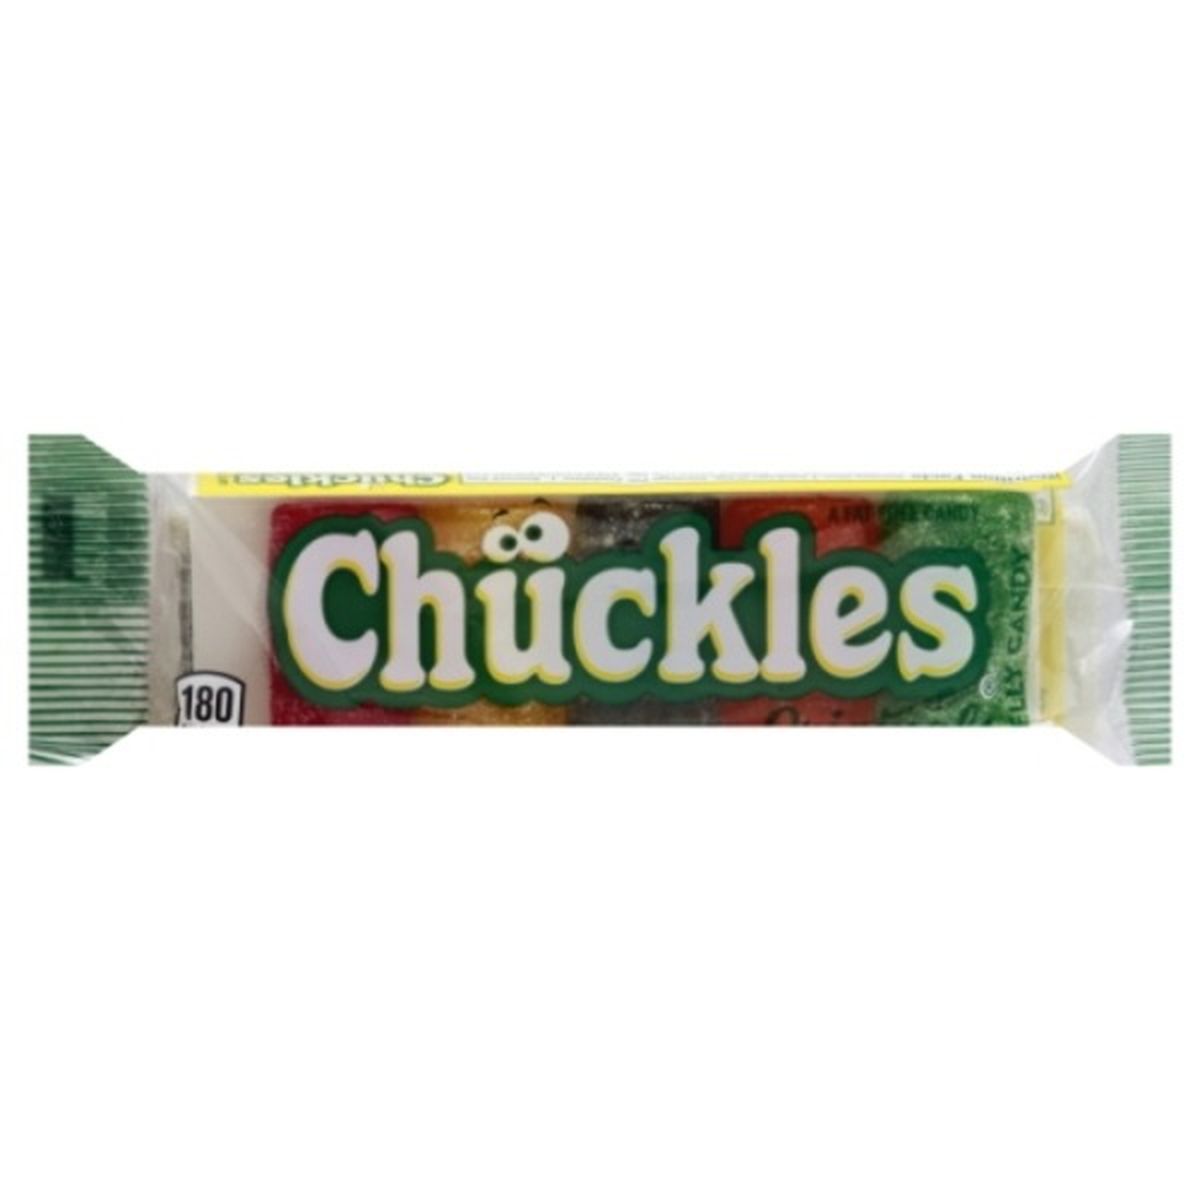 Calories in Chuckles Jelly Candy, Originals